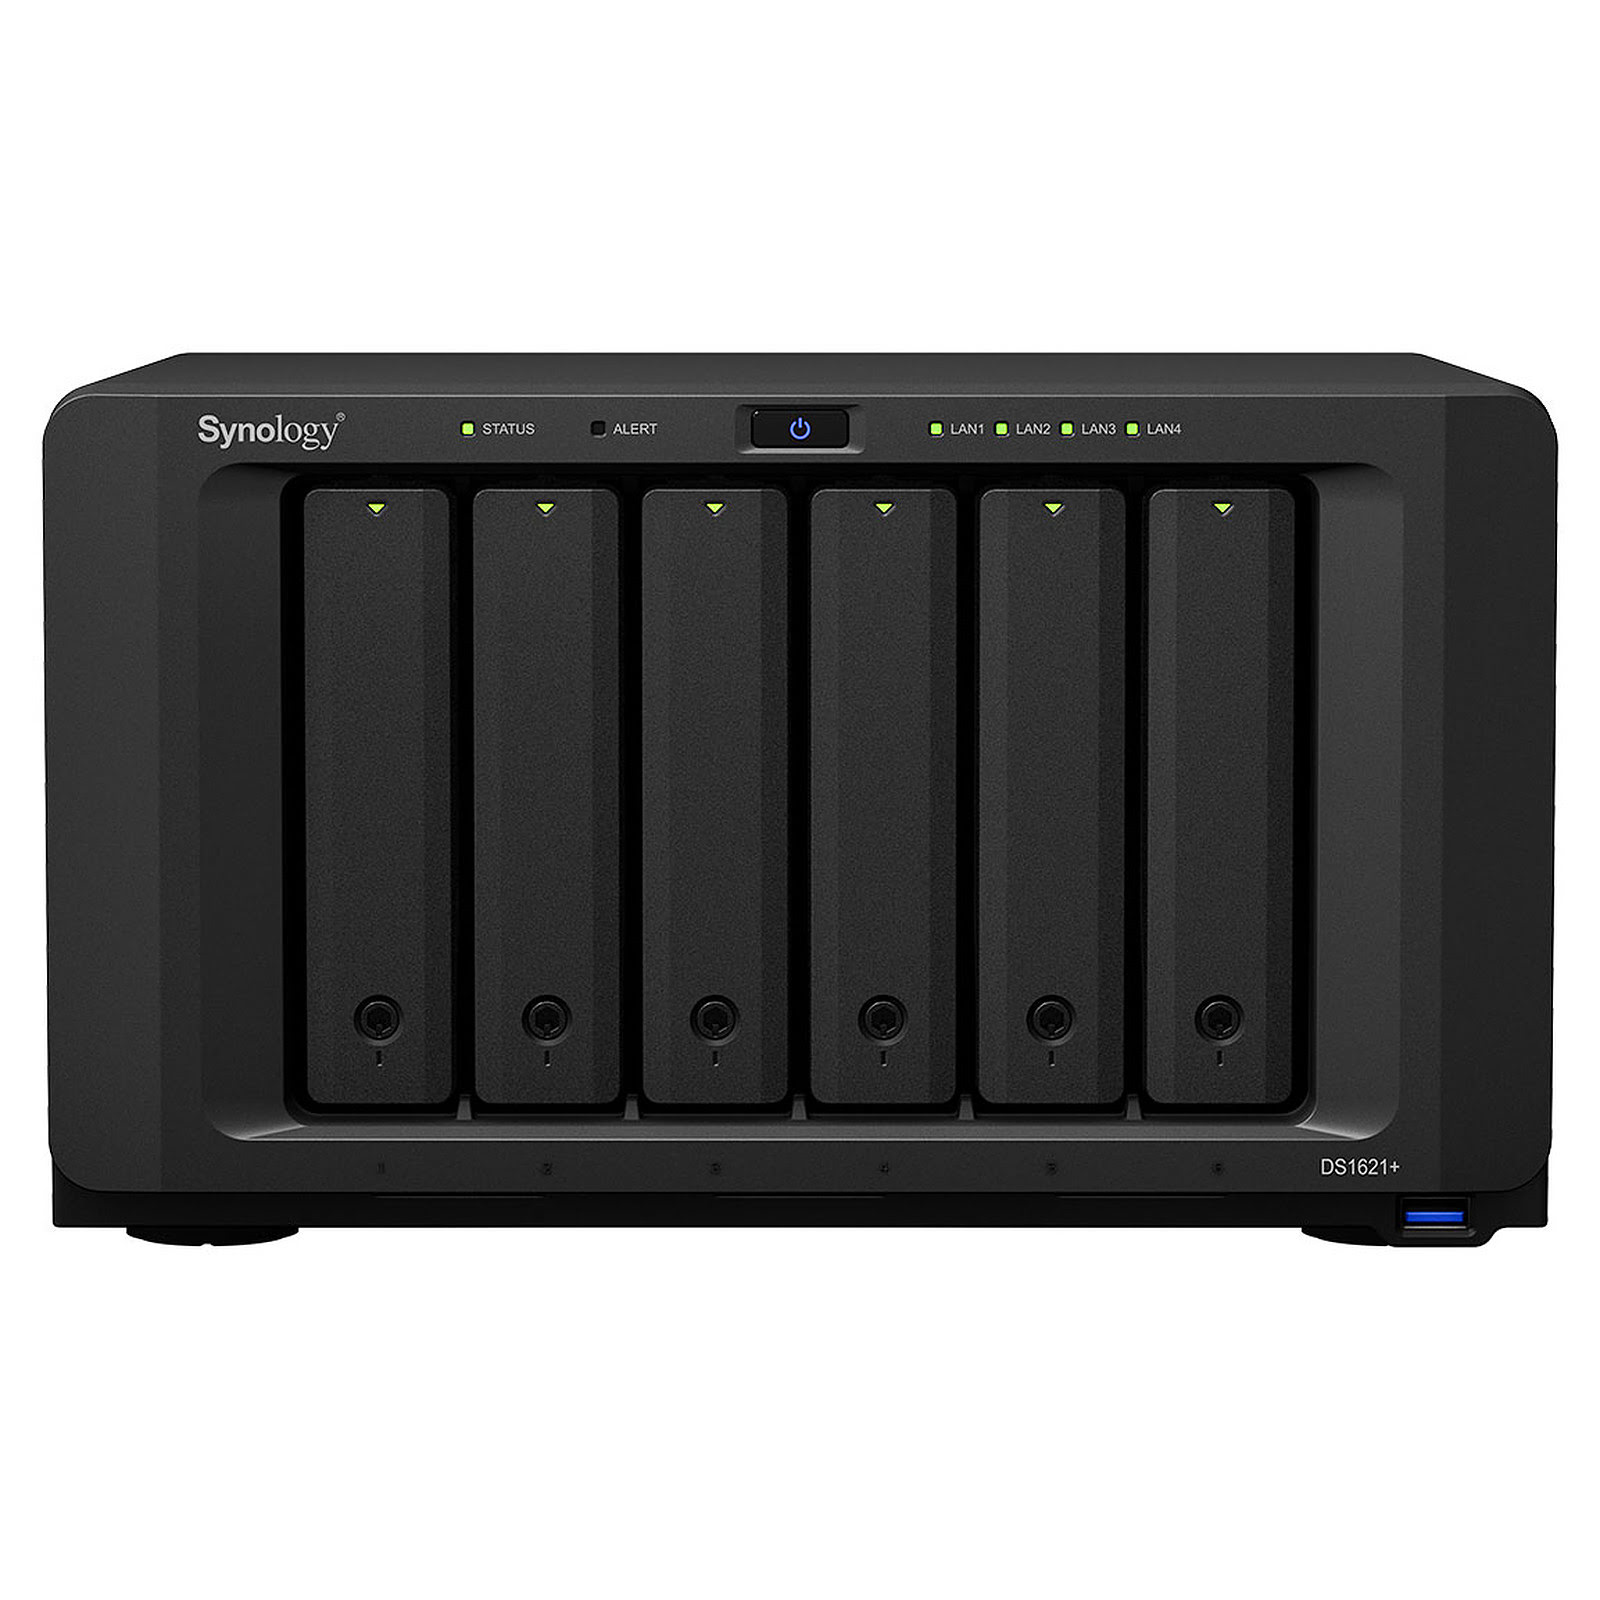 Synology DS1621+ - 6 Baies  - Serveur NAS Synology - grosbill-pro.com - 4